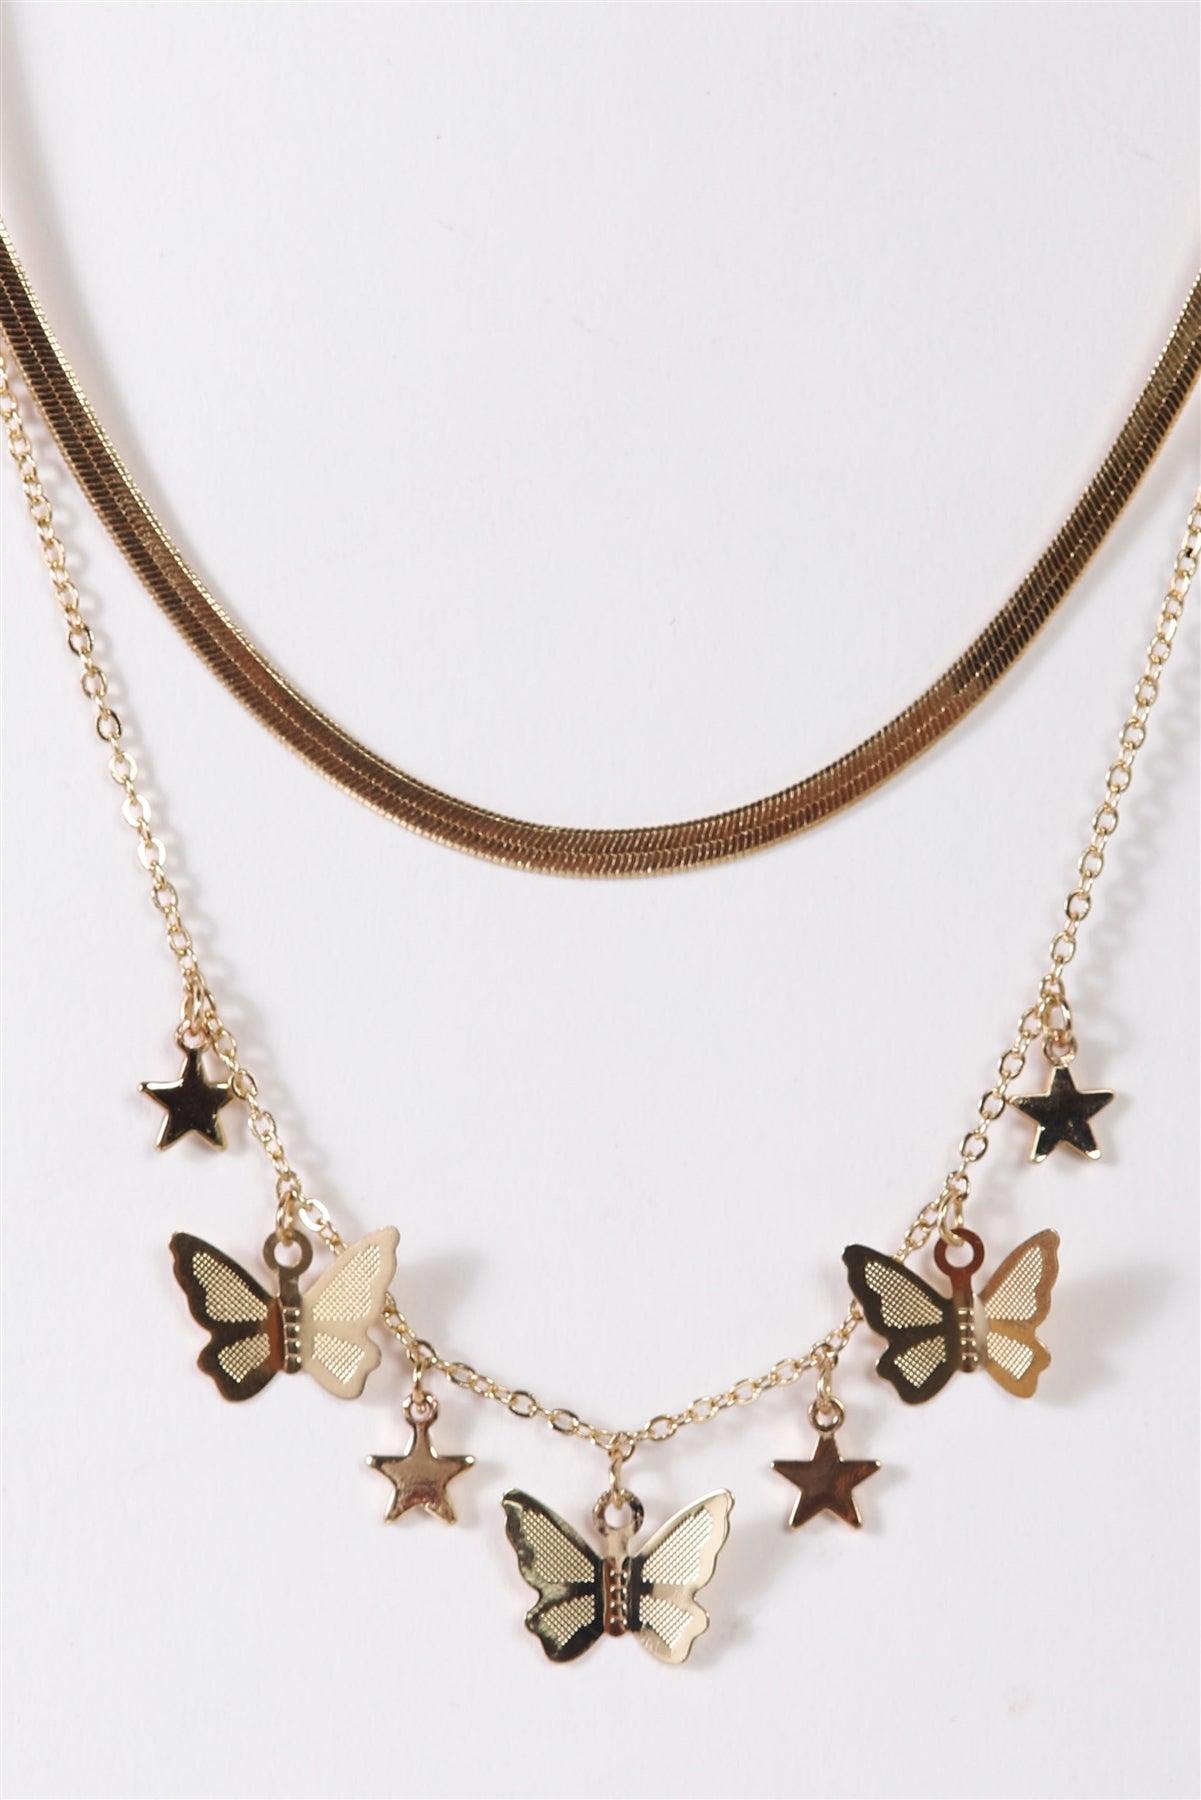 Gold Flat Snake & Link Chain With 3D Butterflies And Stars Charms Set Necklace /3 Pieces